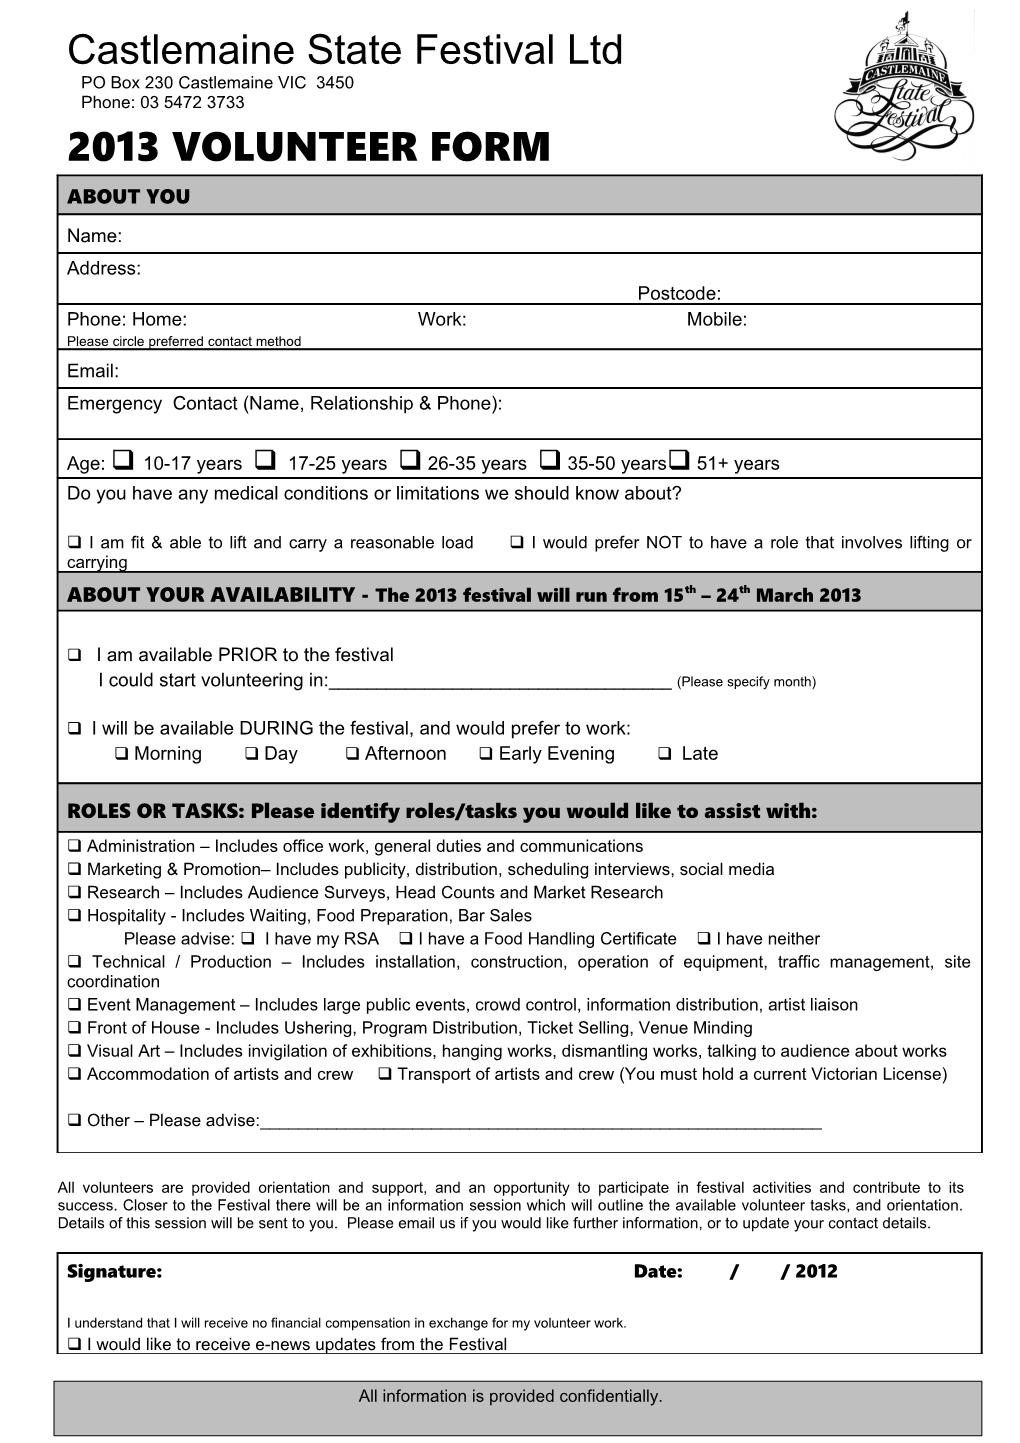 Please Return This Form to the Festival Office 1St Floor IGA Complex, Or Email To